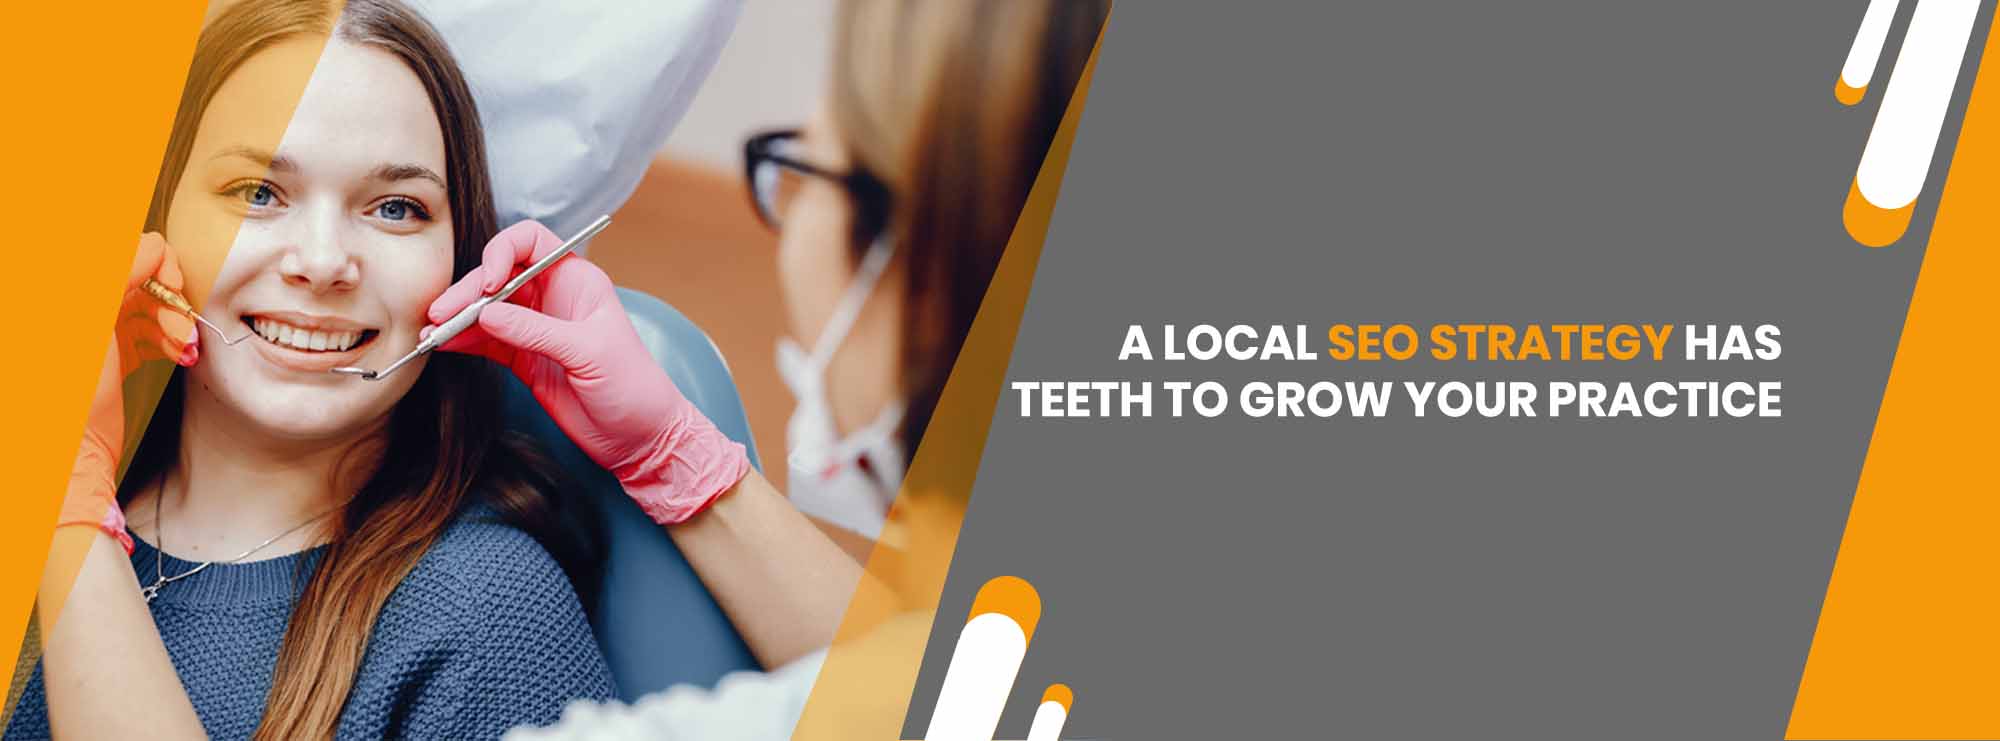 a-local-seo-strategy-has-teeth-to-grow-your-dental-practice